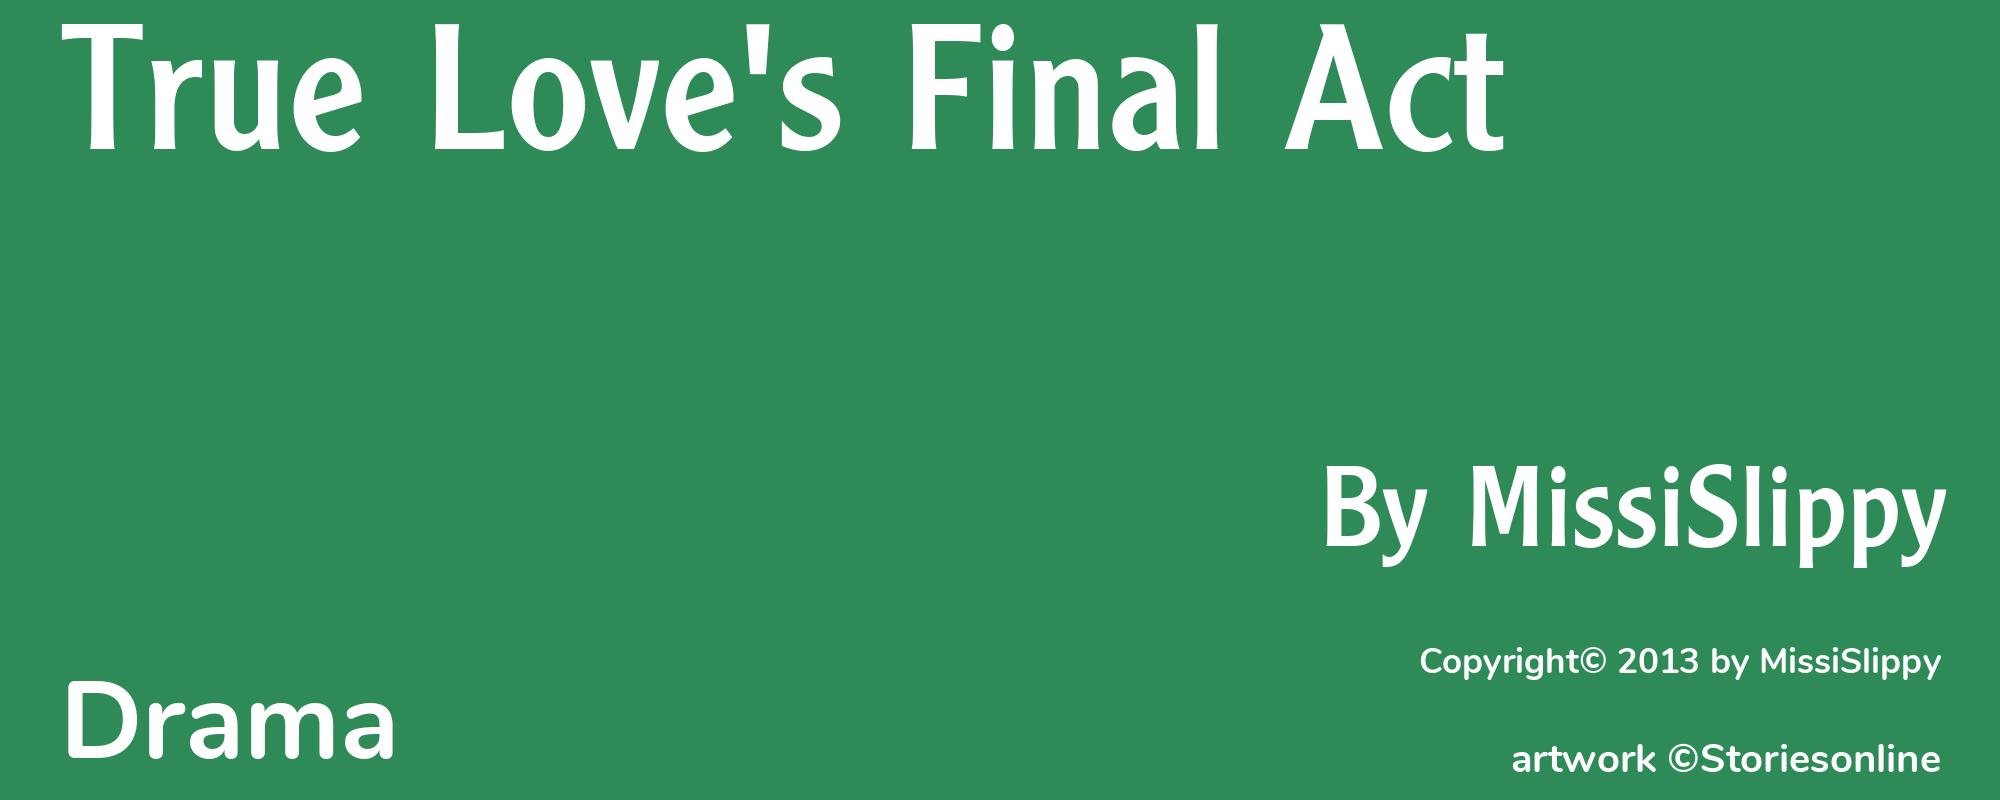 True Love's Final Act - Cover